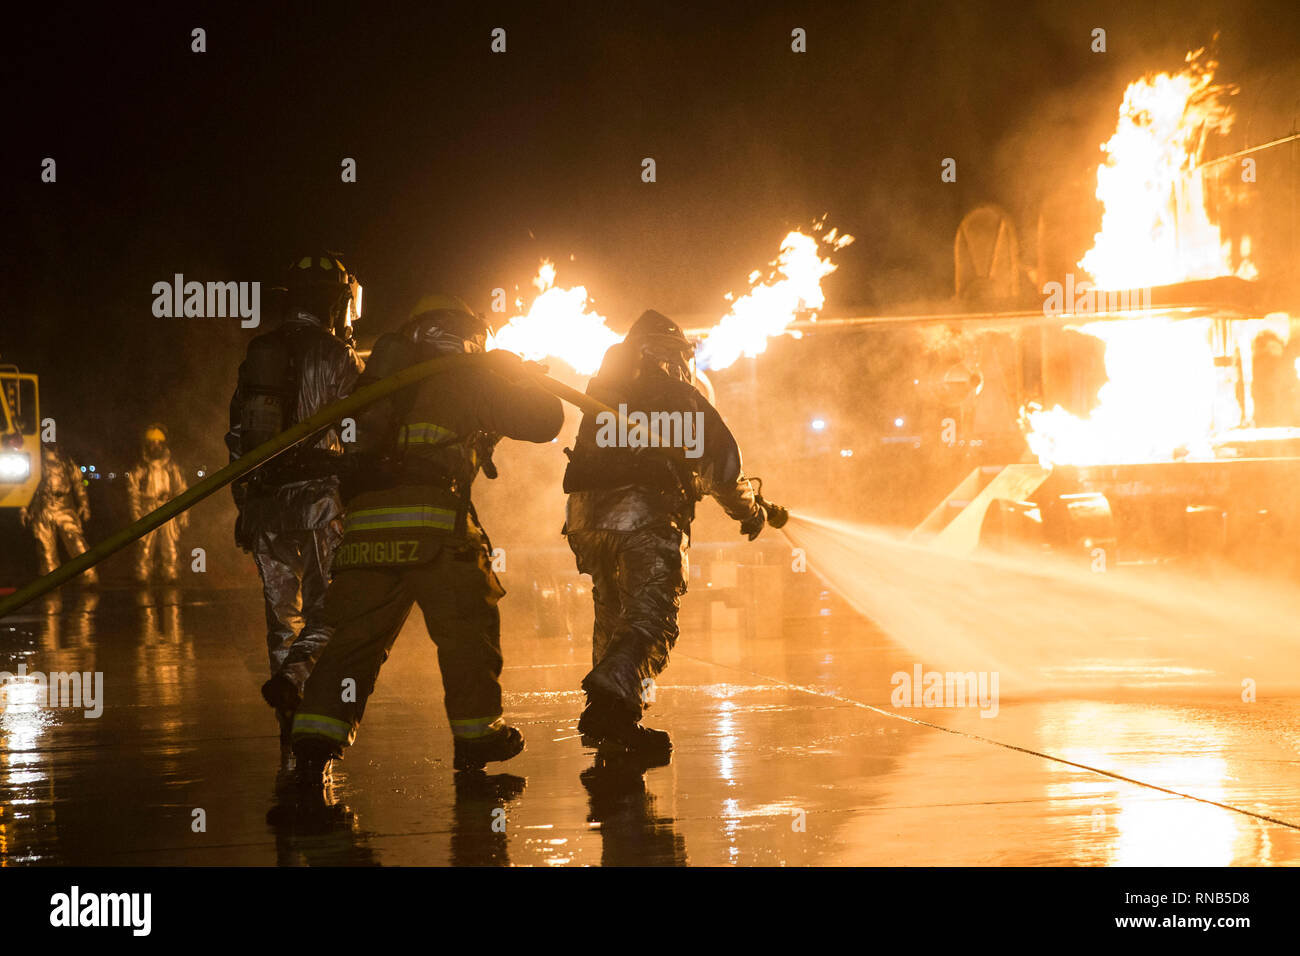 U.S. Marines with Aircraft Rescue and Fire Fighting (ARFF) conduct Hand Line Drills at Marine Corps Air Station (MCAS) Yuma Feb. 15, 2019. These drills focus on techniques to push fuel fires away from aircraft and simulate large aircraft fire fighting. The Marines train monthly to enhance their readiness when responding to hazards or emergencies on the flight line. (U.S. Marine Corps photo by Cpl. Sabrina Candiaflores) Stock Photo